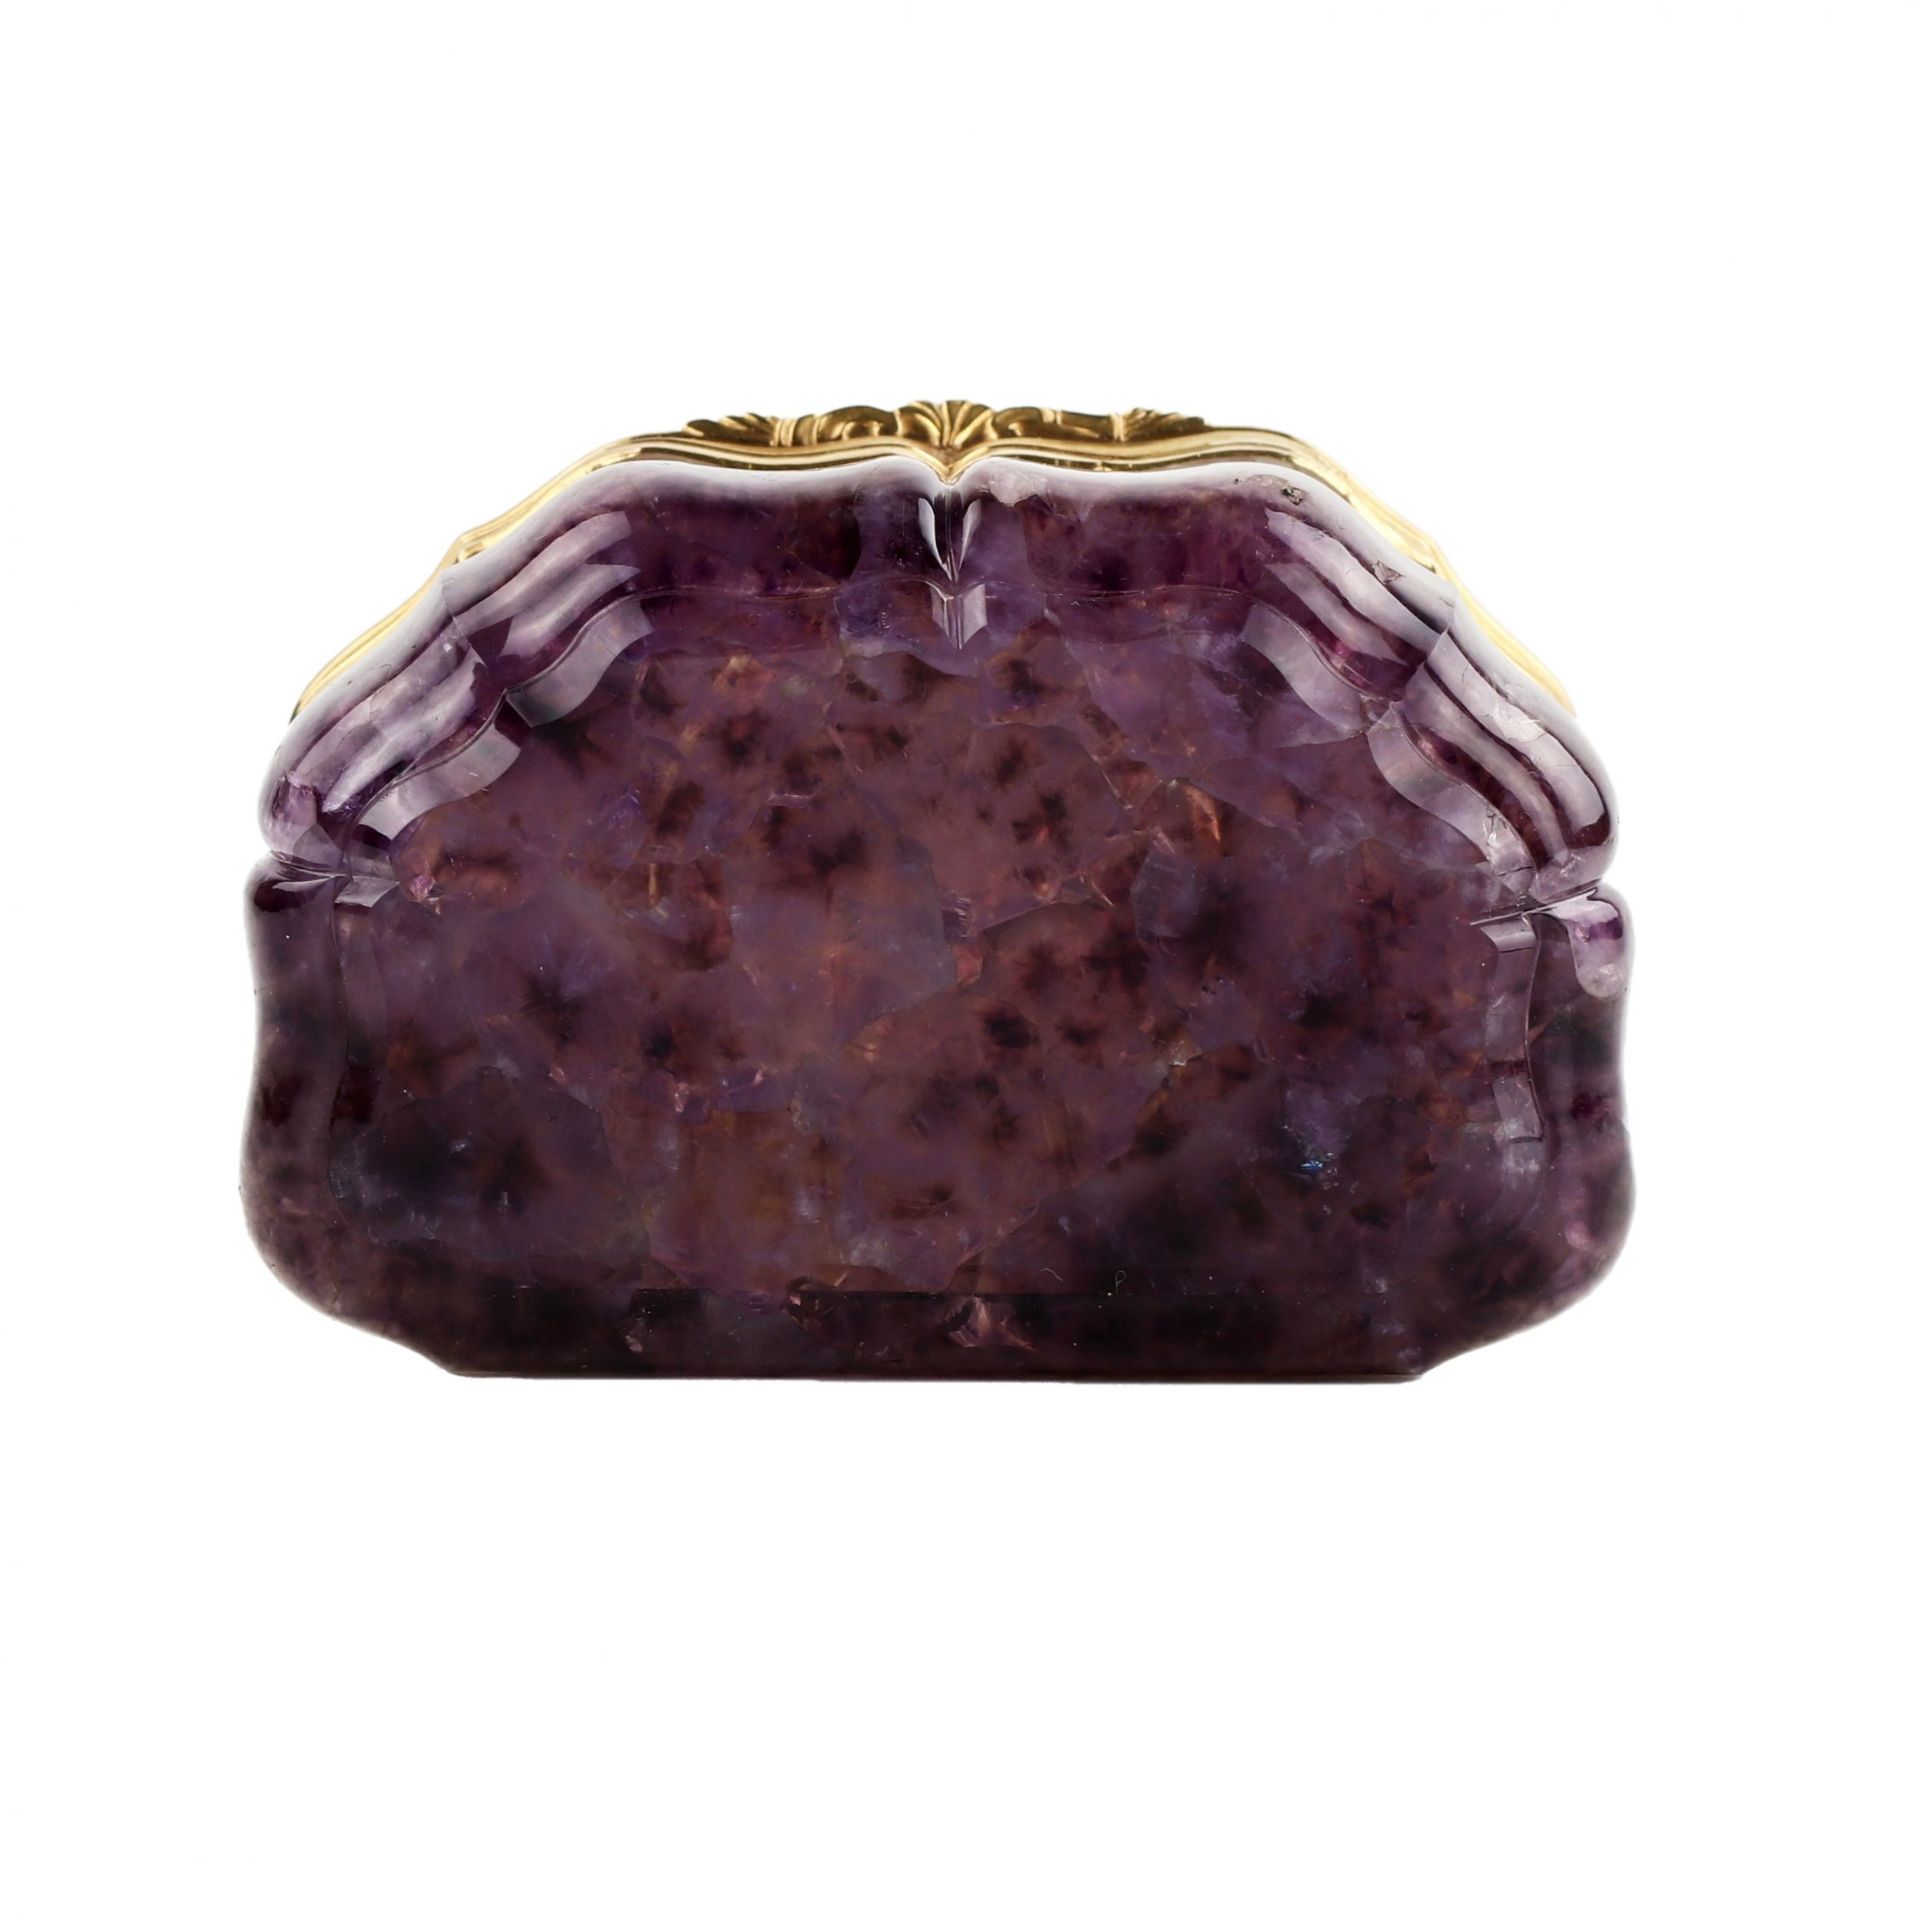 Unique snuff box made of solid amethyst with gold. I. Keibel, St. Petersburg, 19th century. - Bild 8 aus 12